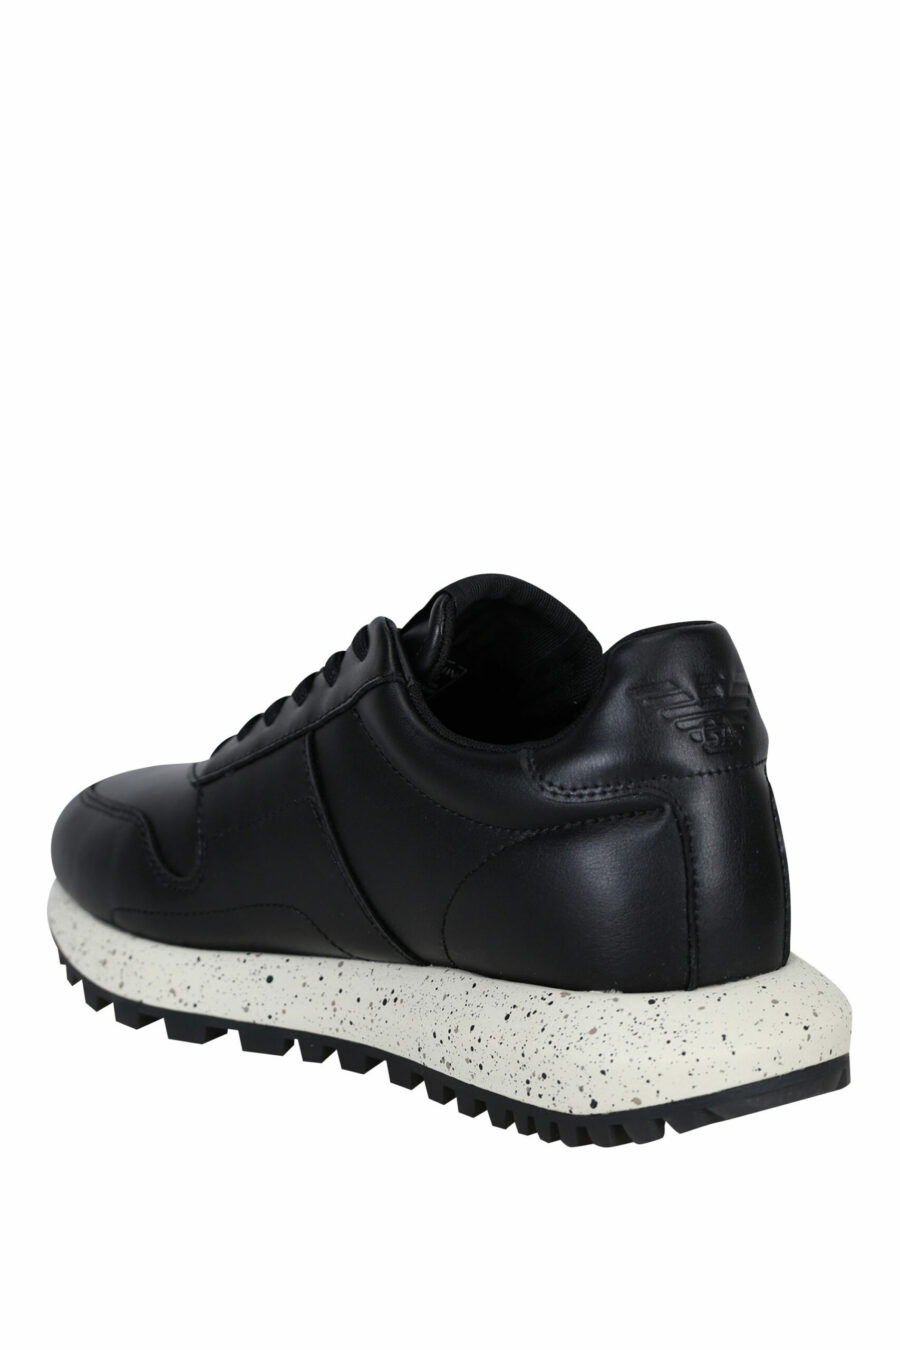 Black recycled leather trainers and minilogo - 8057767442187 3 scaled